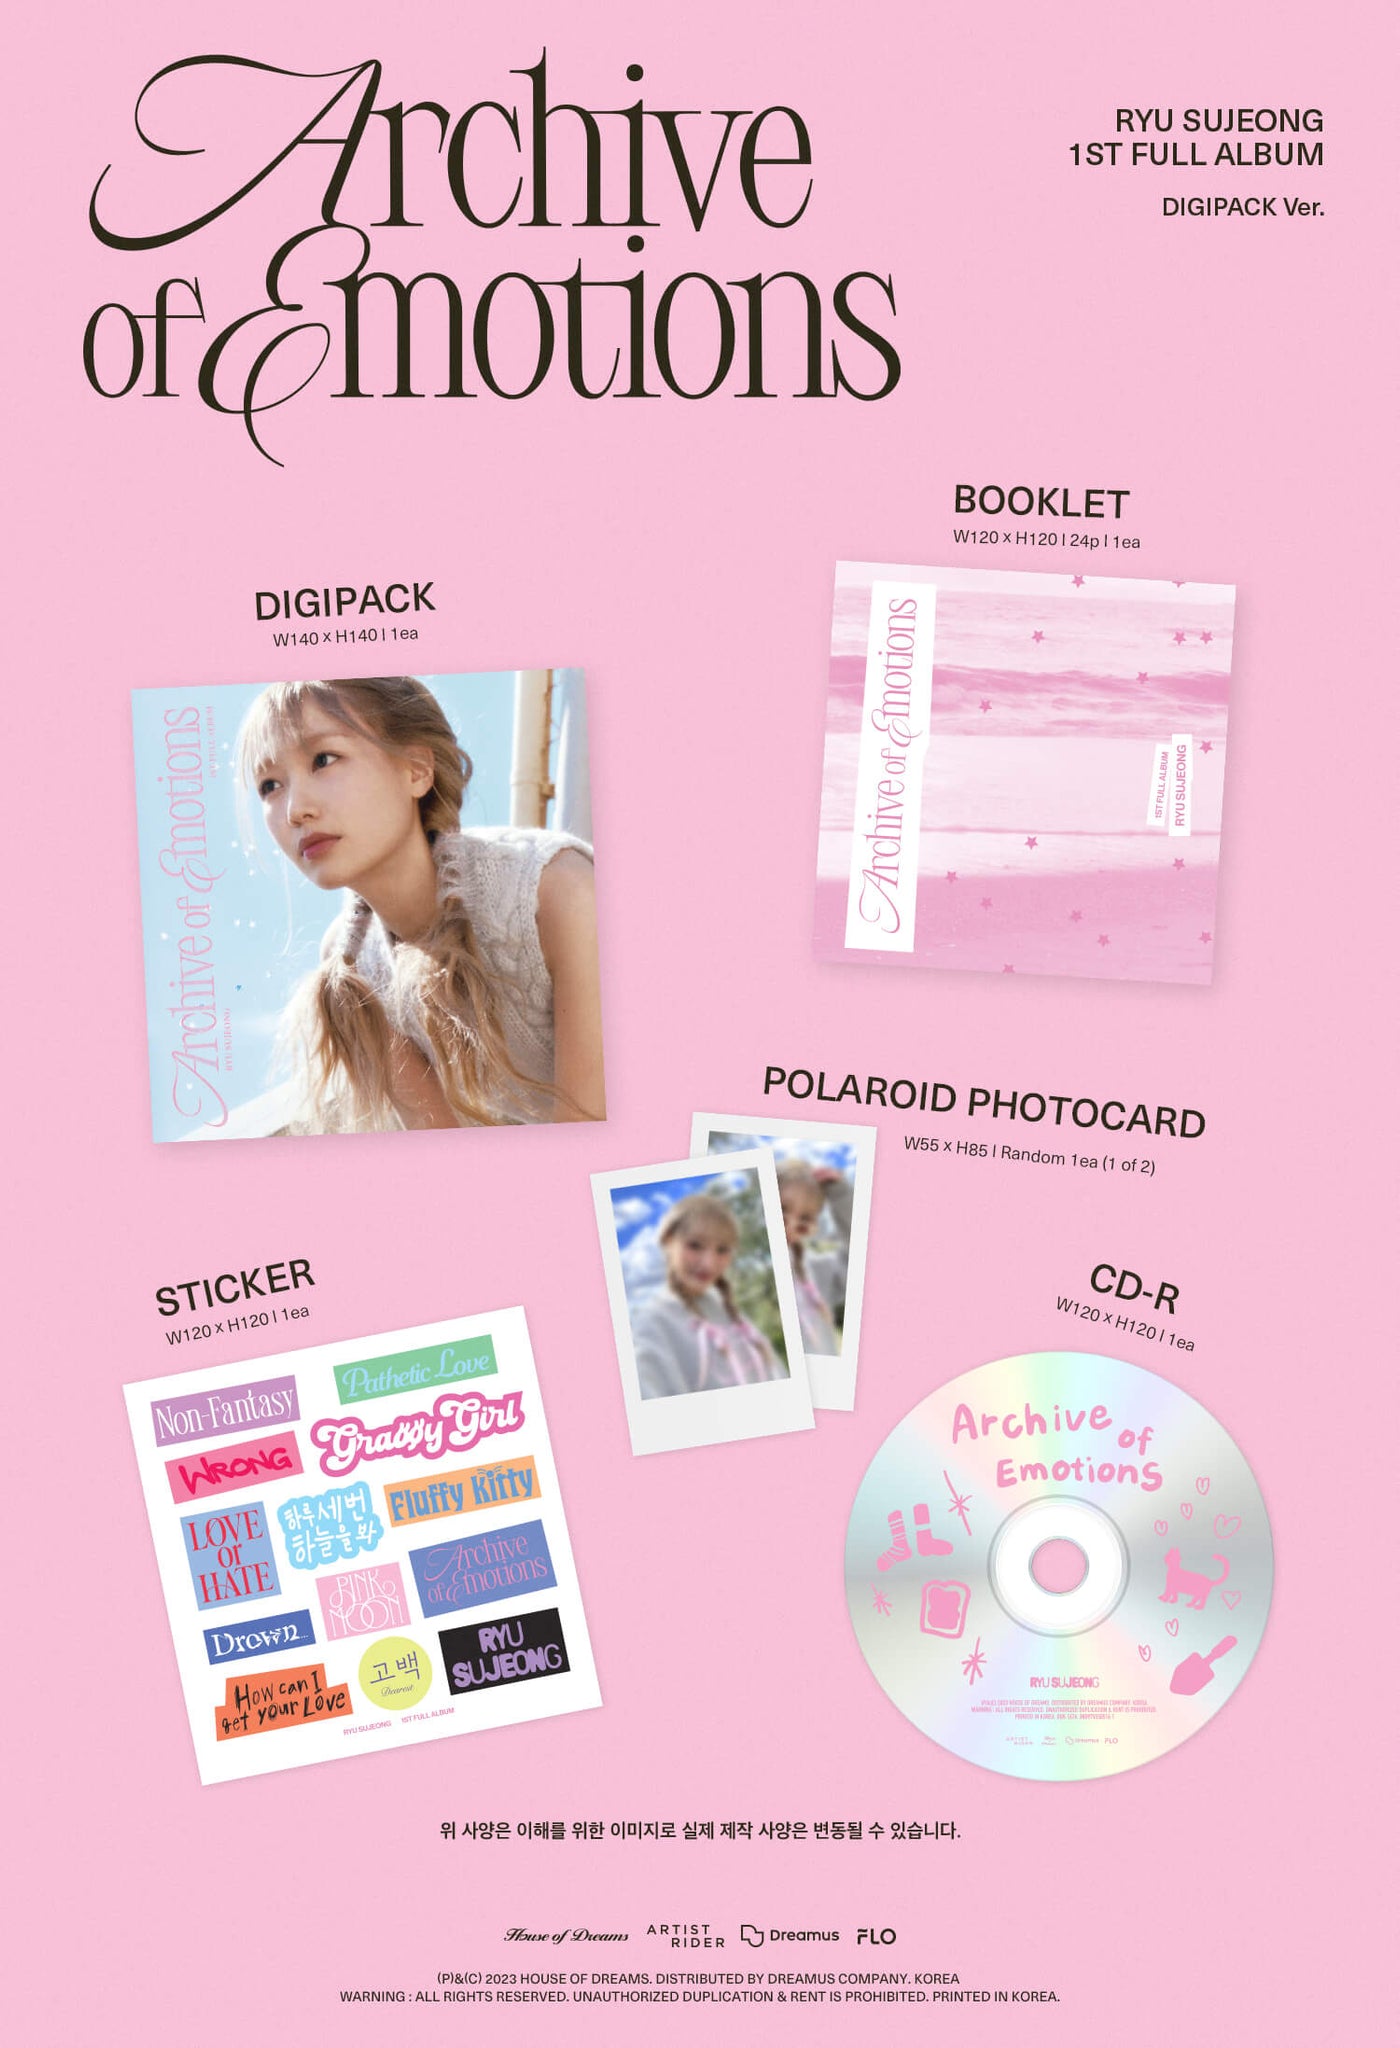 Ryu Sujeong Archive of Emotions Inclusions Digipack Booklet Polaroid Photocard Sticker CD